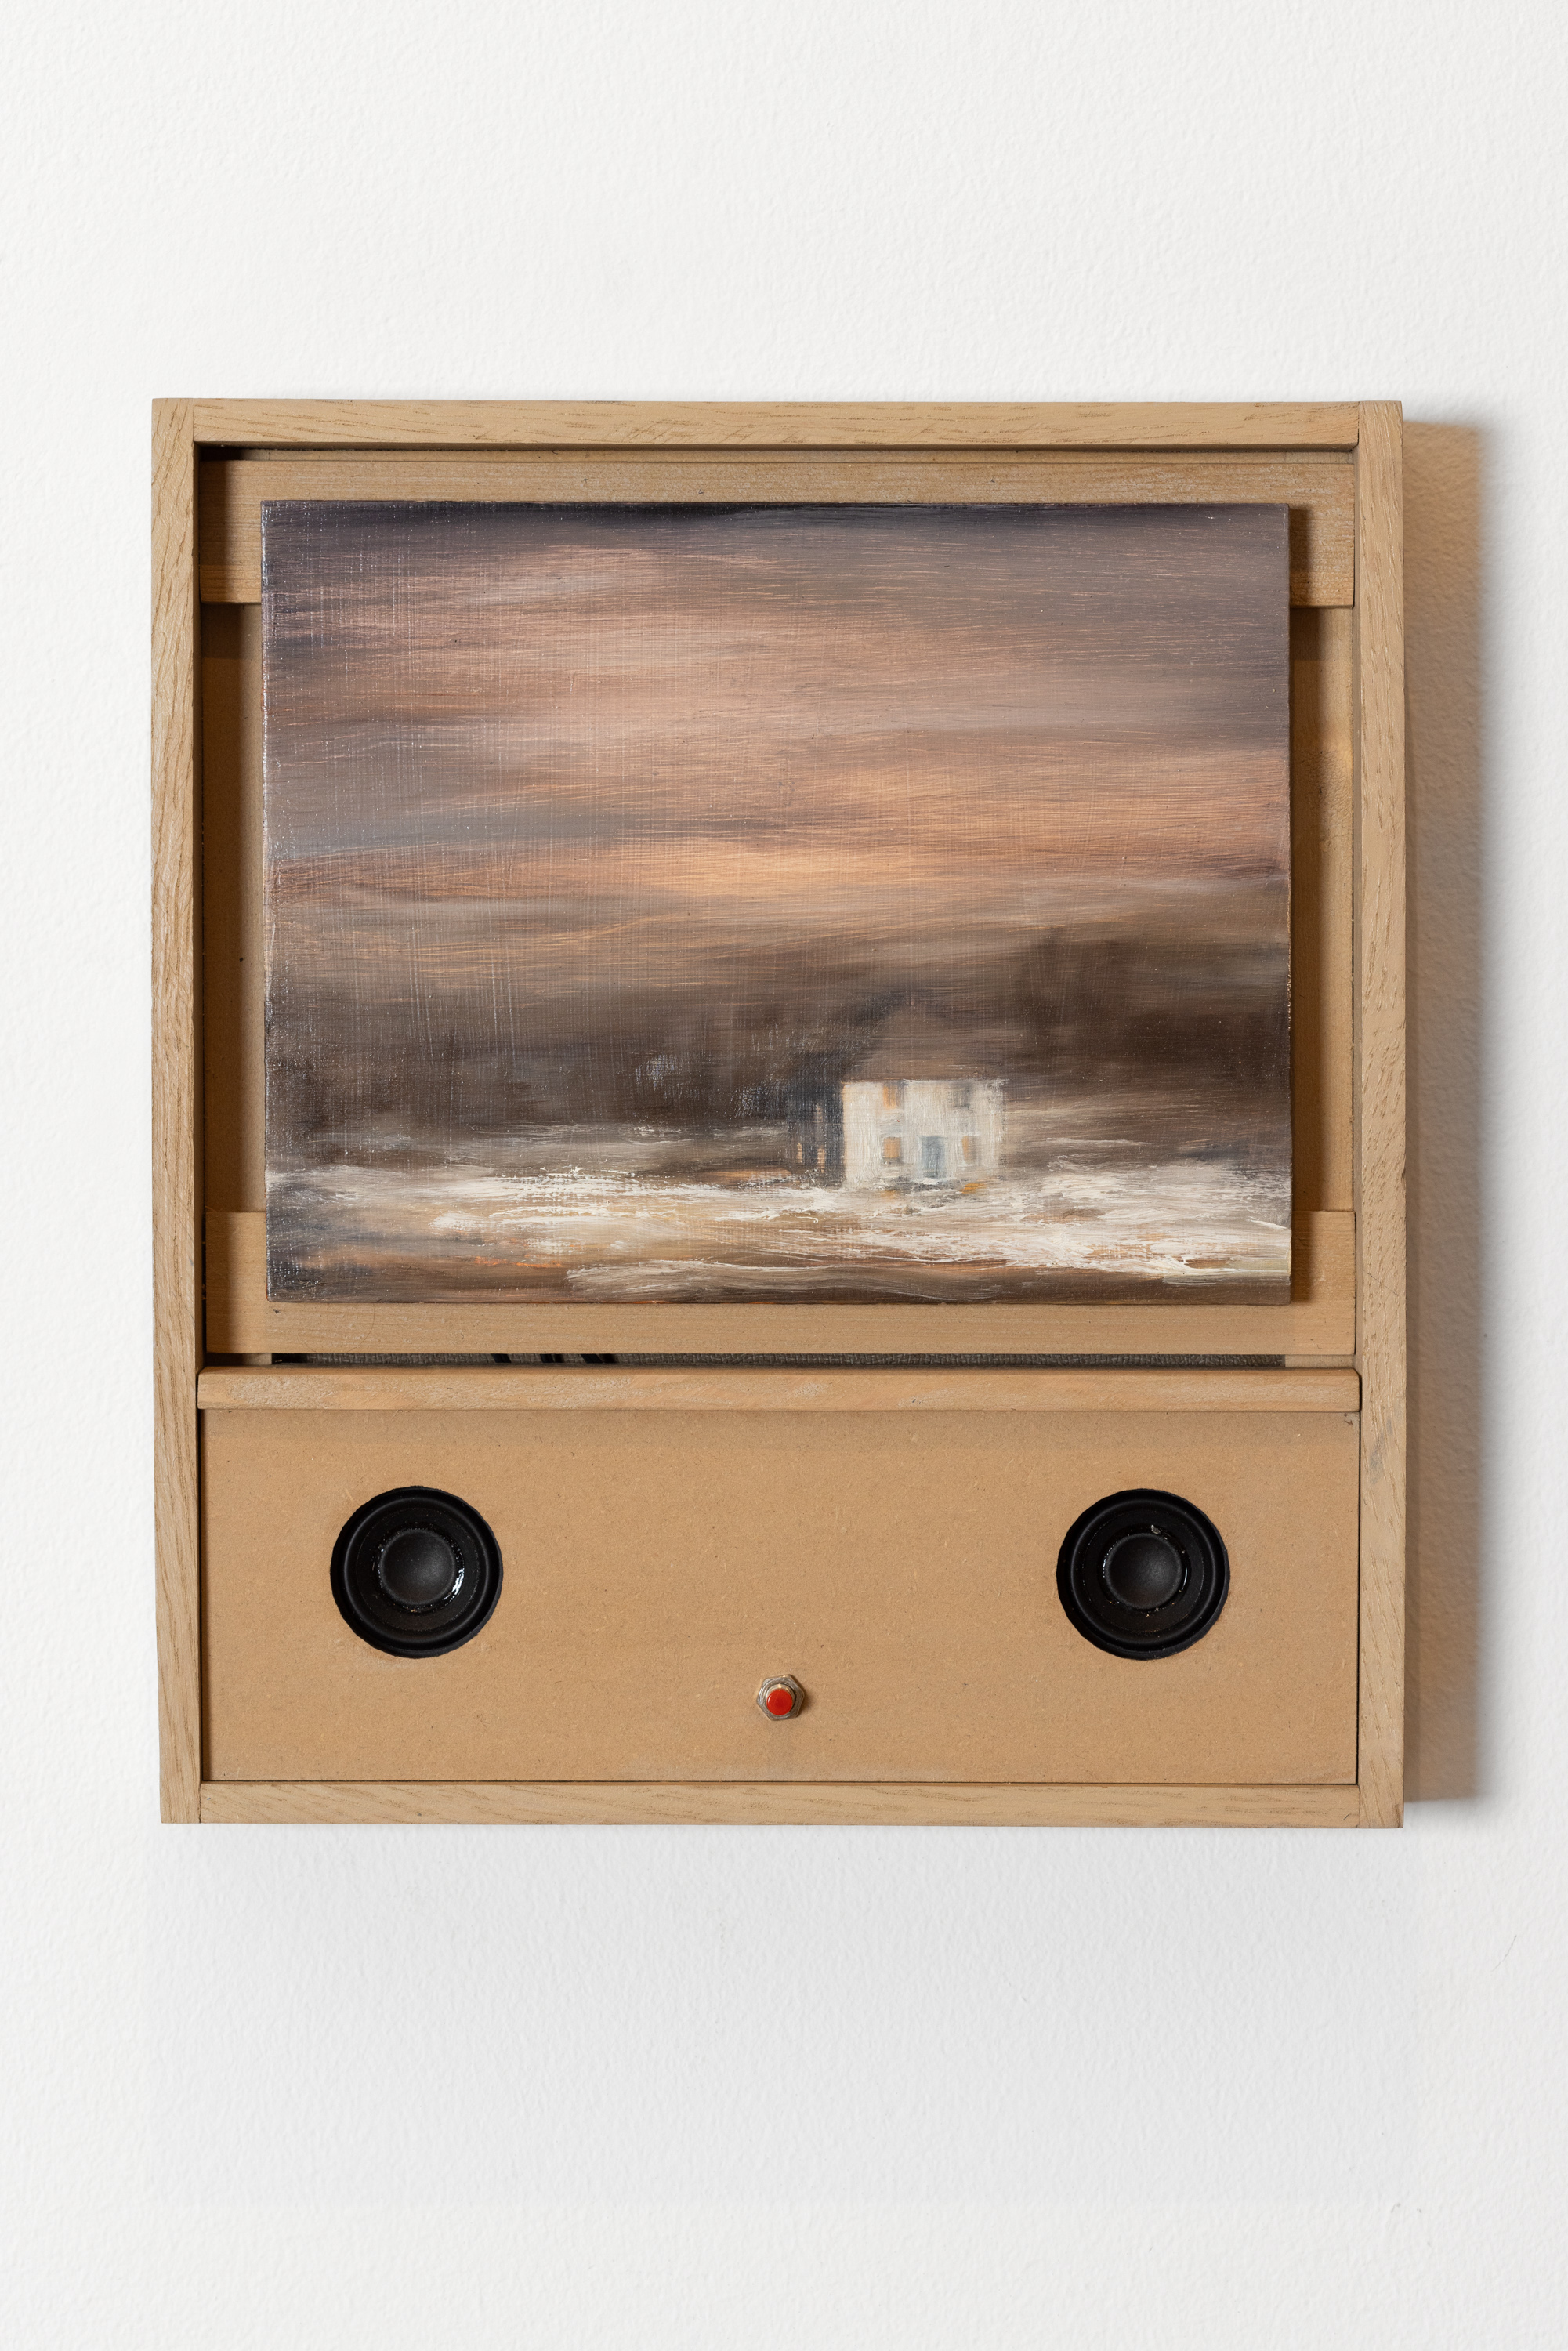 Color image of a mixed media artwork with an oil painting depicting a house in an empty filed attached to a wooden box with two speakers and a red button on a white gallery wall